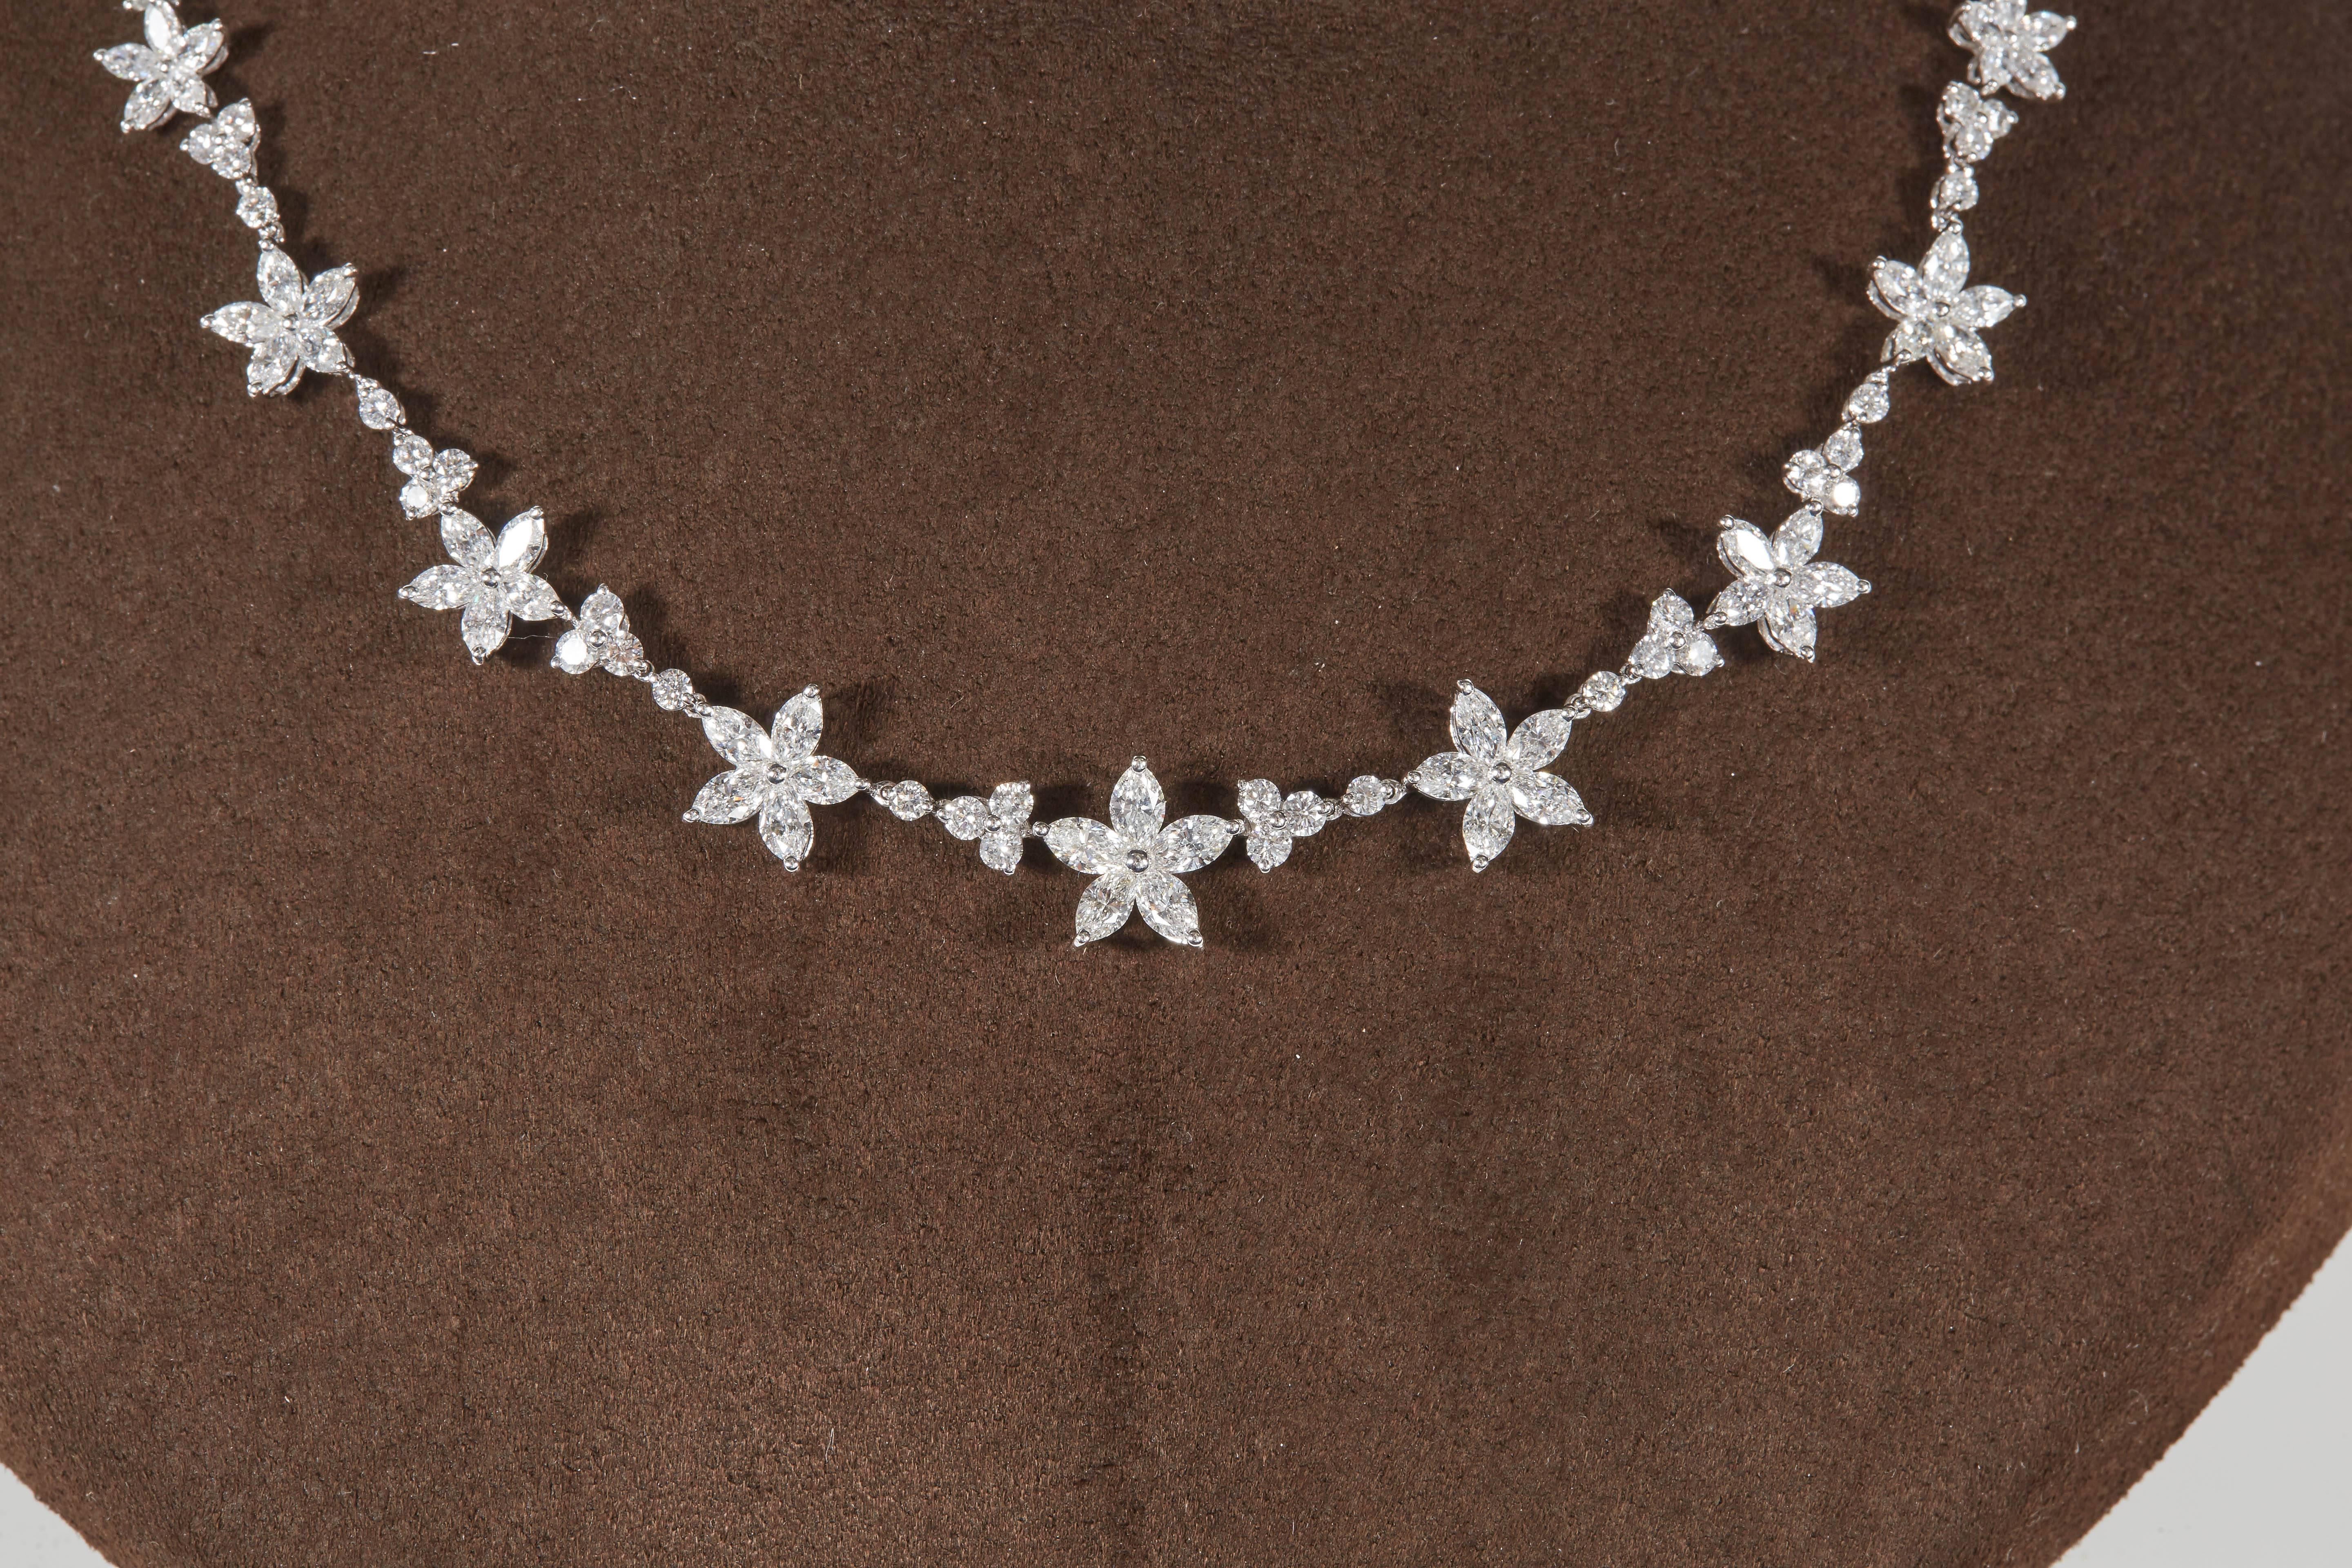 
An elegant diamond necklace featuring marquise and round brilliant cut diamonds. 

8.12 carats of white VS diamonds. 

18k white gold

Approximately 15.25 inch length, the length can be adjusted. 

